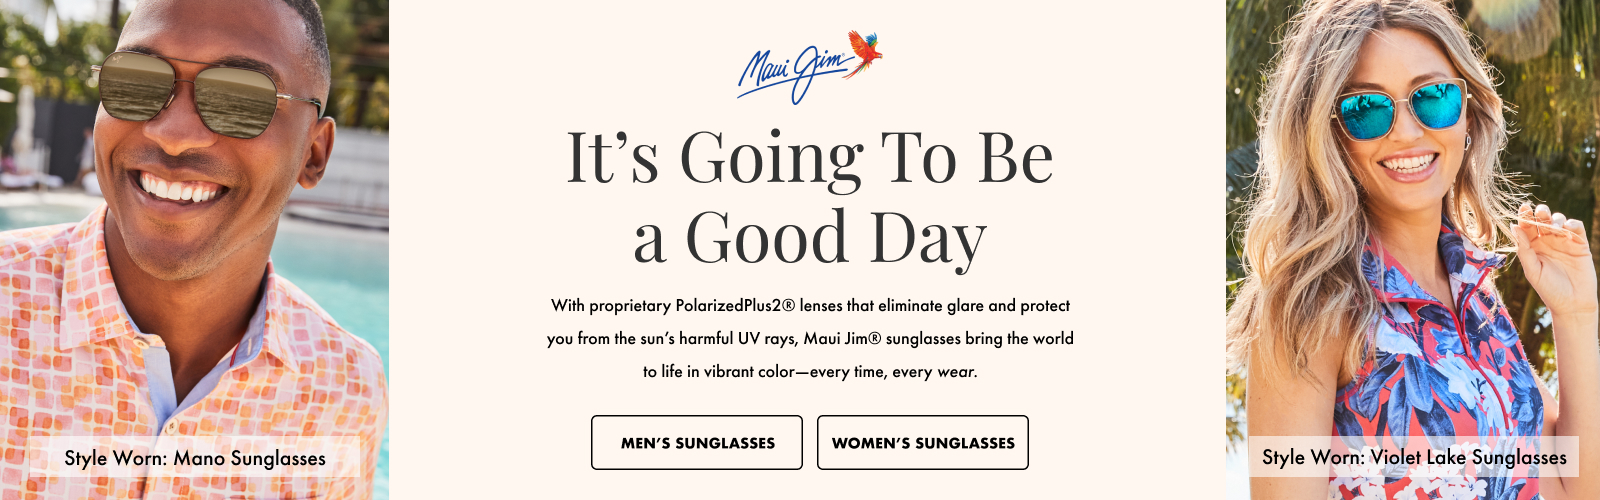 Maui Jim - It's Going To Be A Good Day